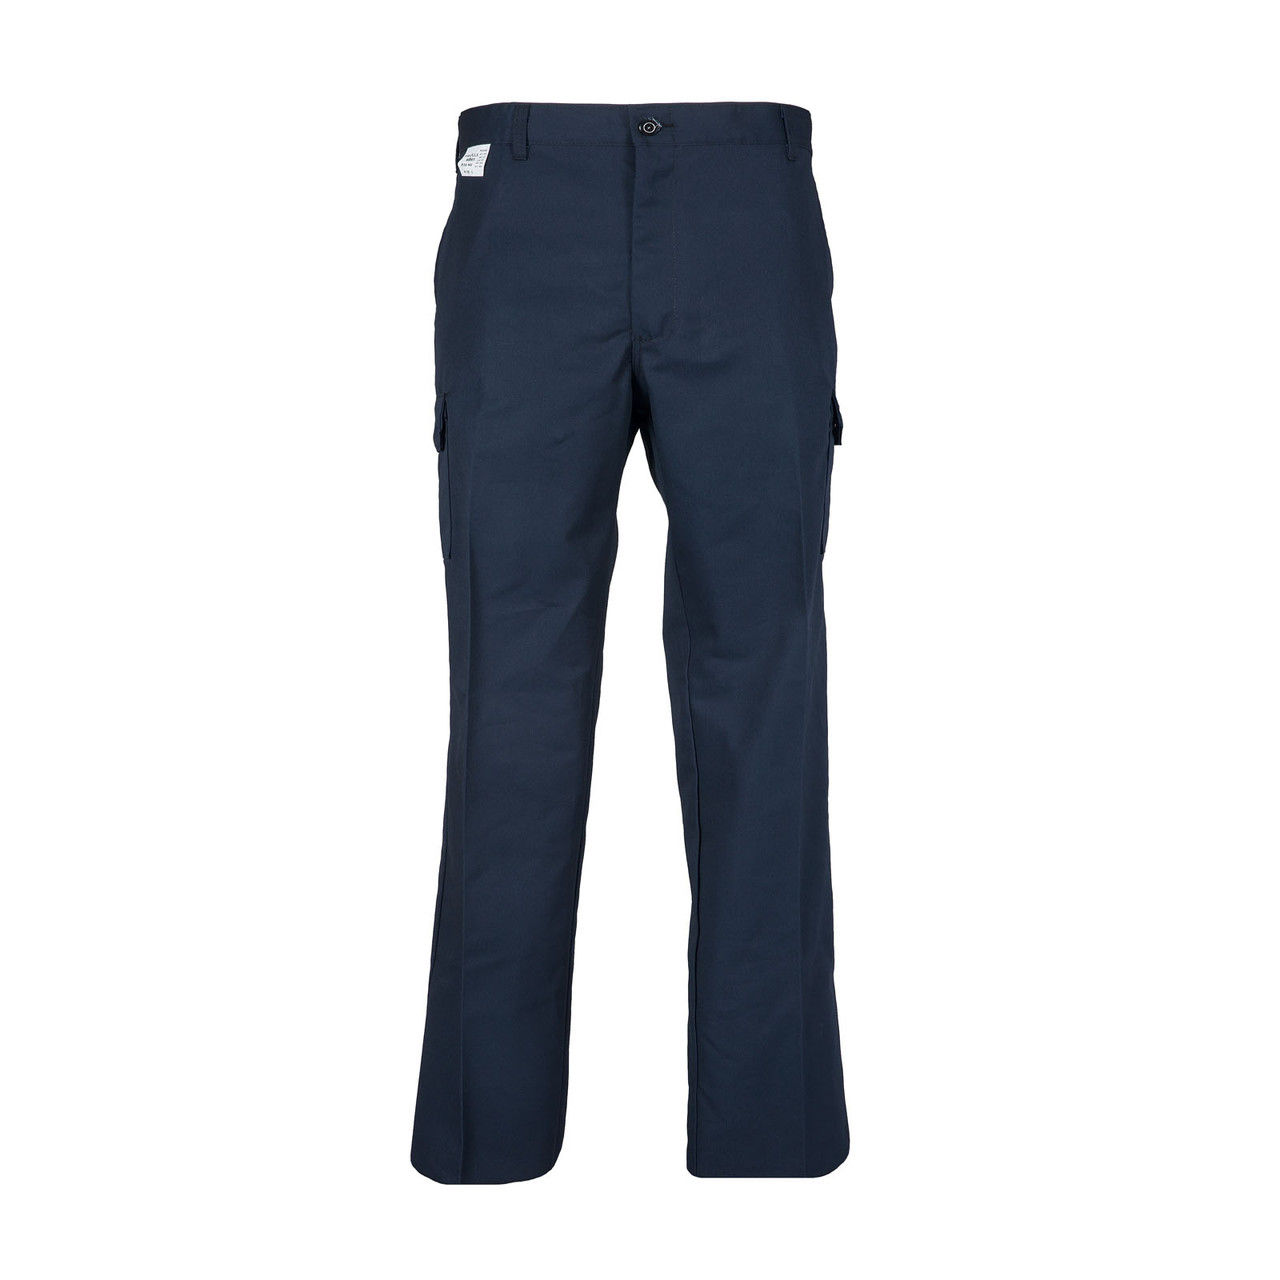 Can you provide details on the navy blue work pants, P24NV Men's Cargo Industrial?